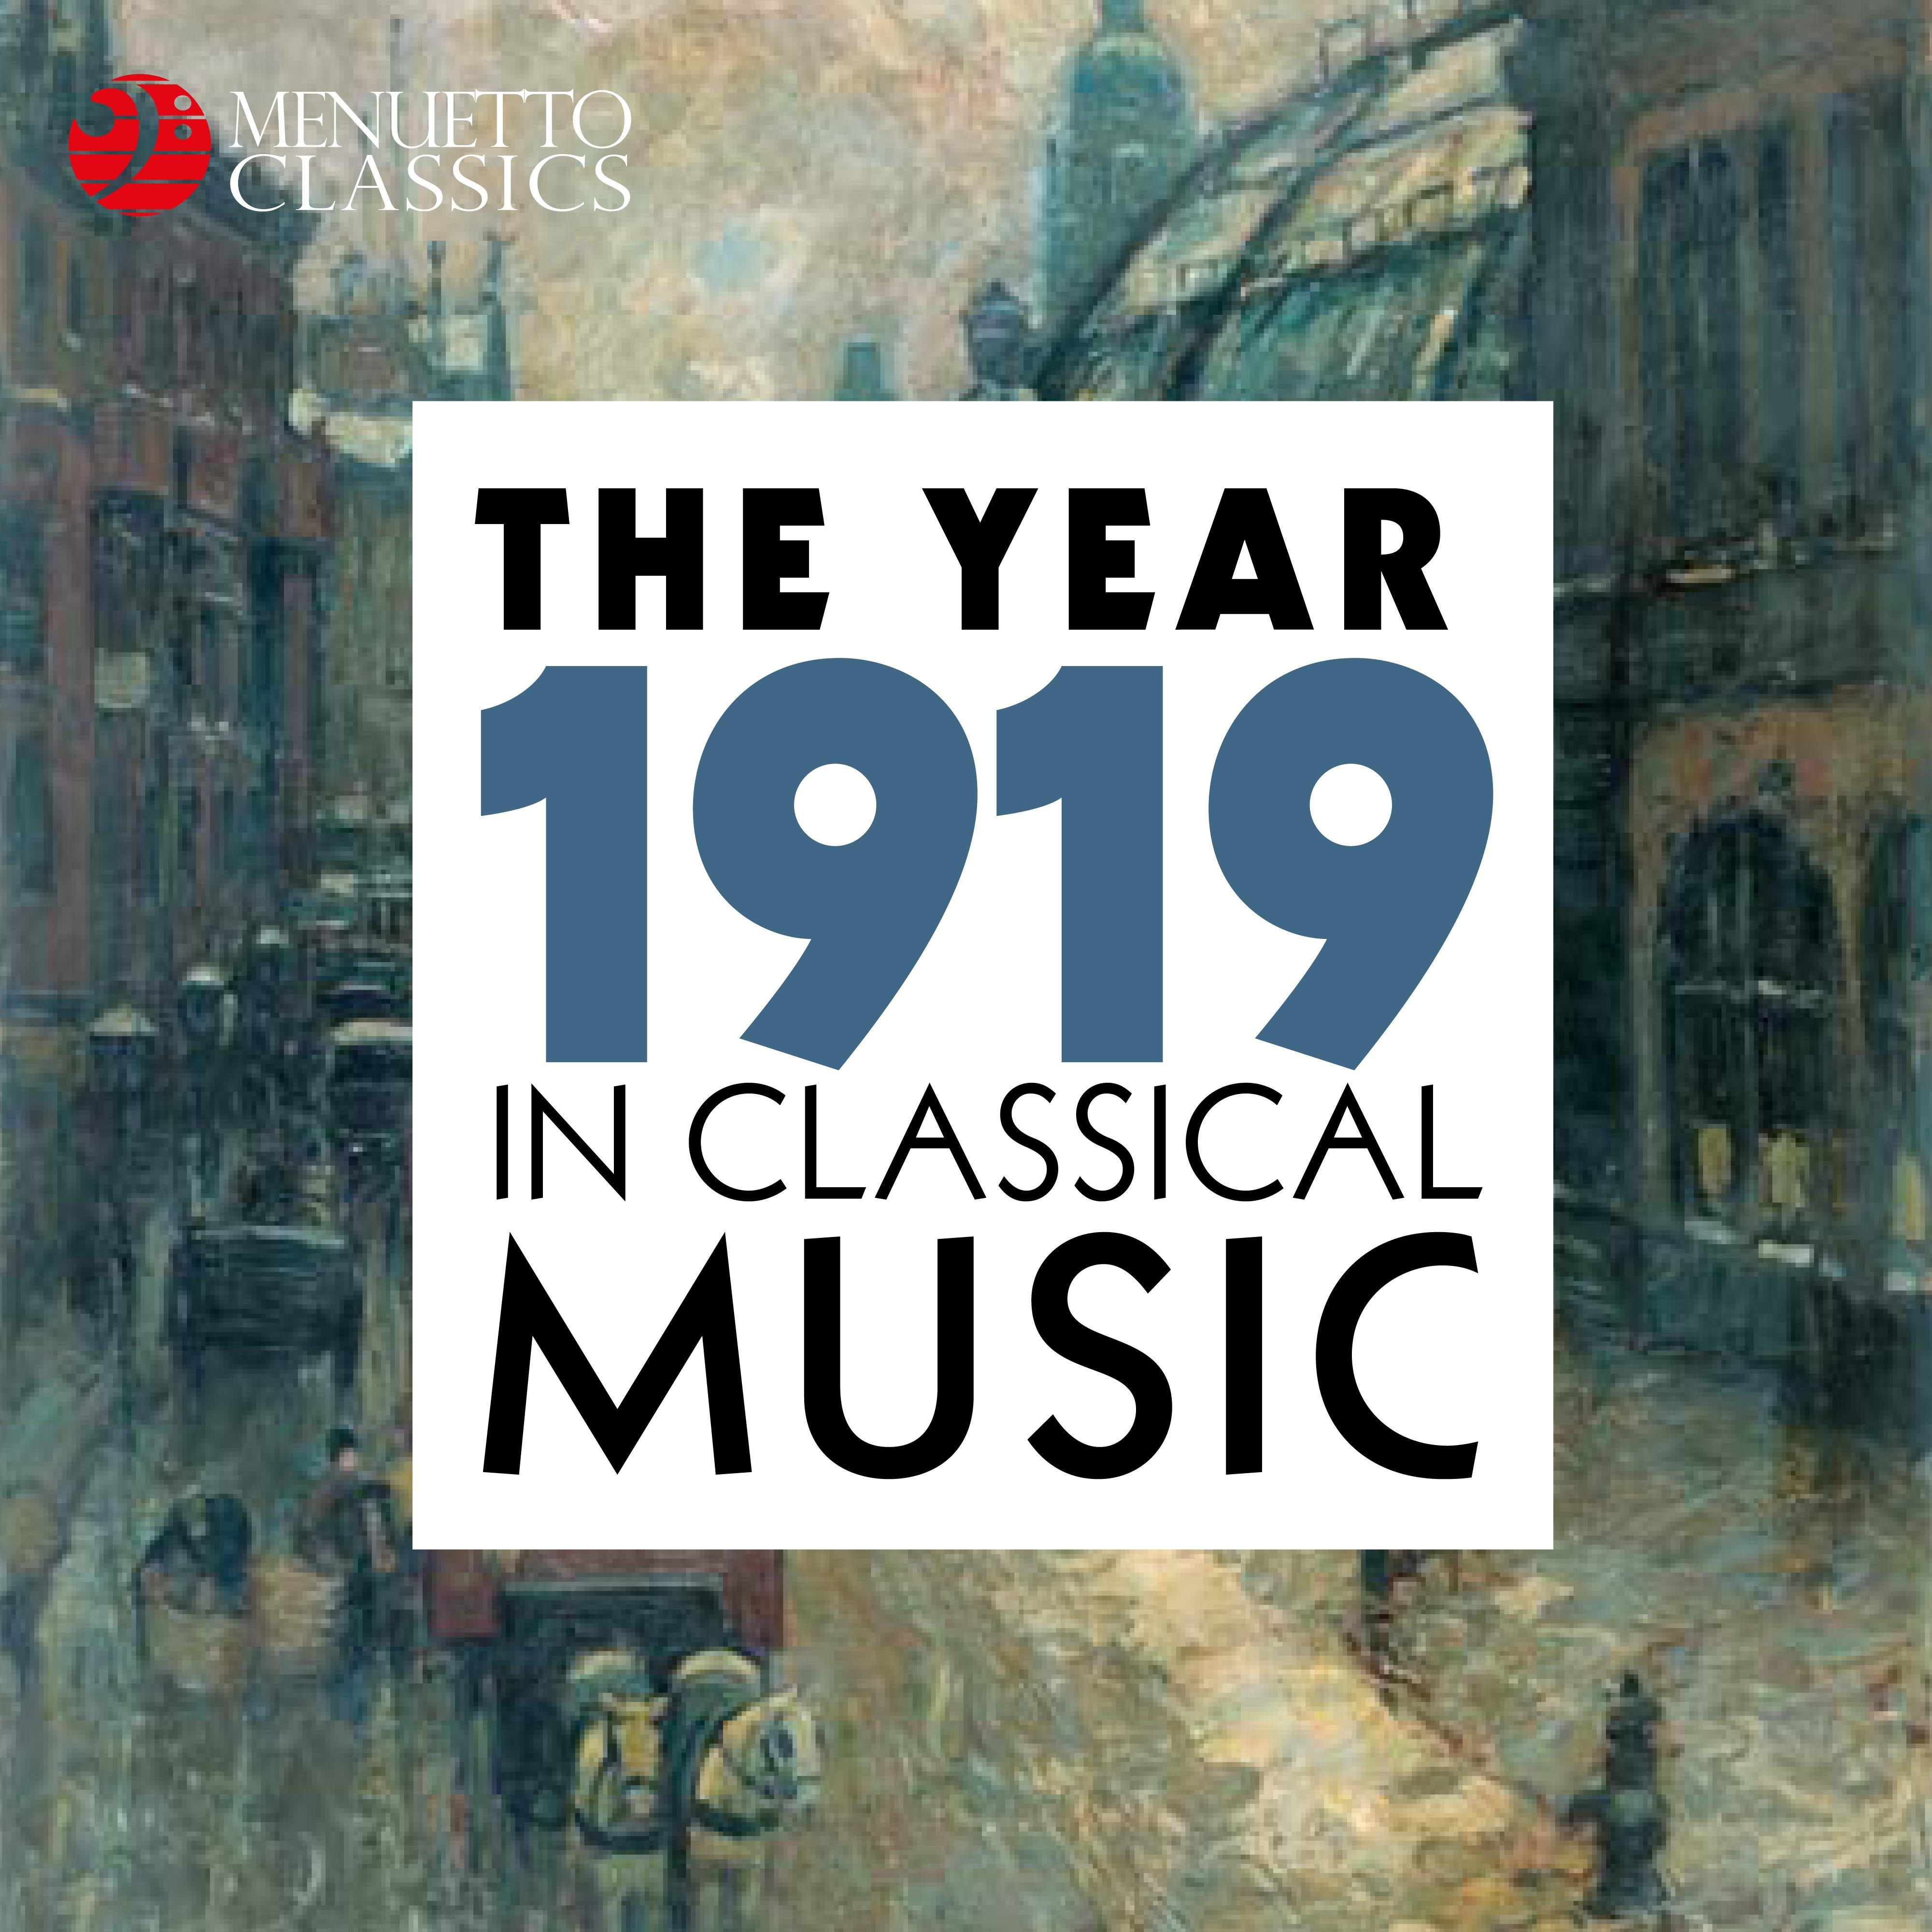 The Year 1919 in Classical Music